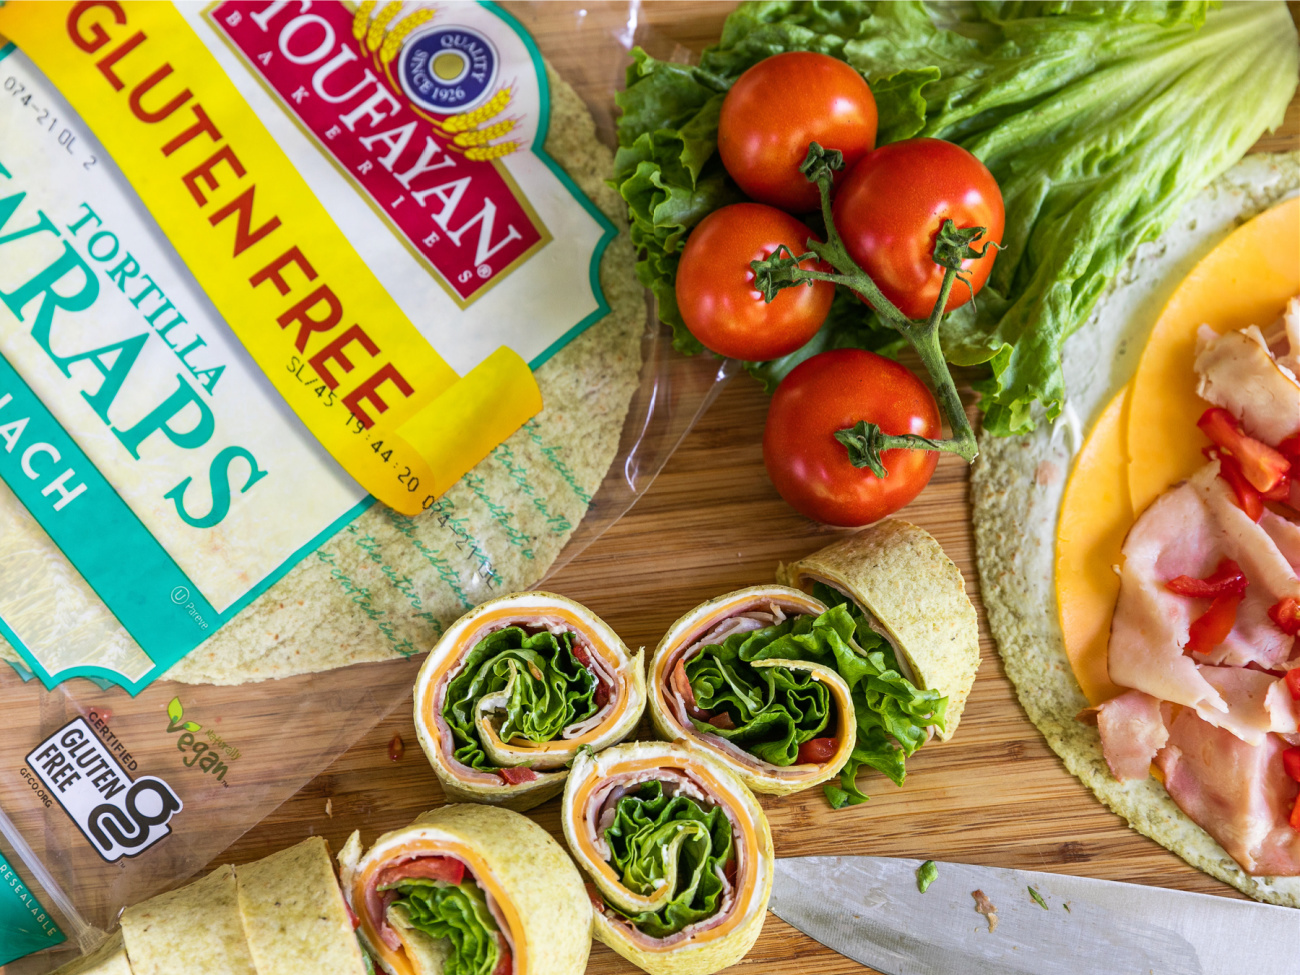 Delicious Toufayan Gluten-Free Wraps Are BOGO At Publix – As Low As $1.05 After Coupon!